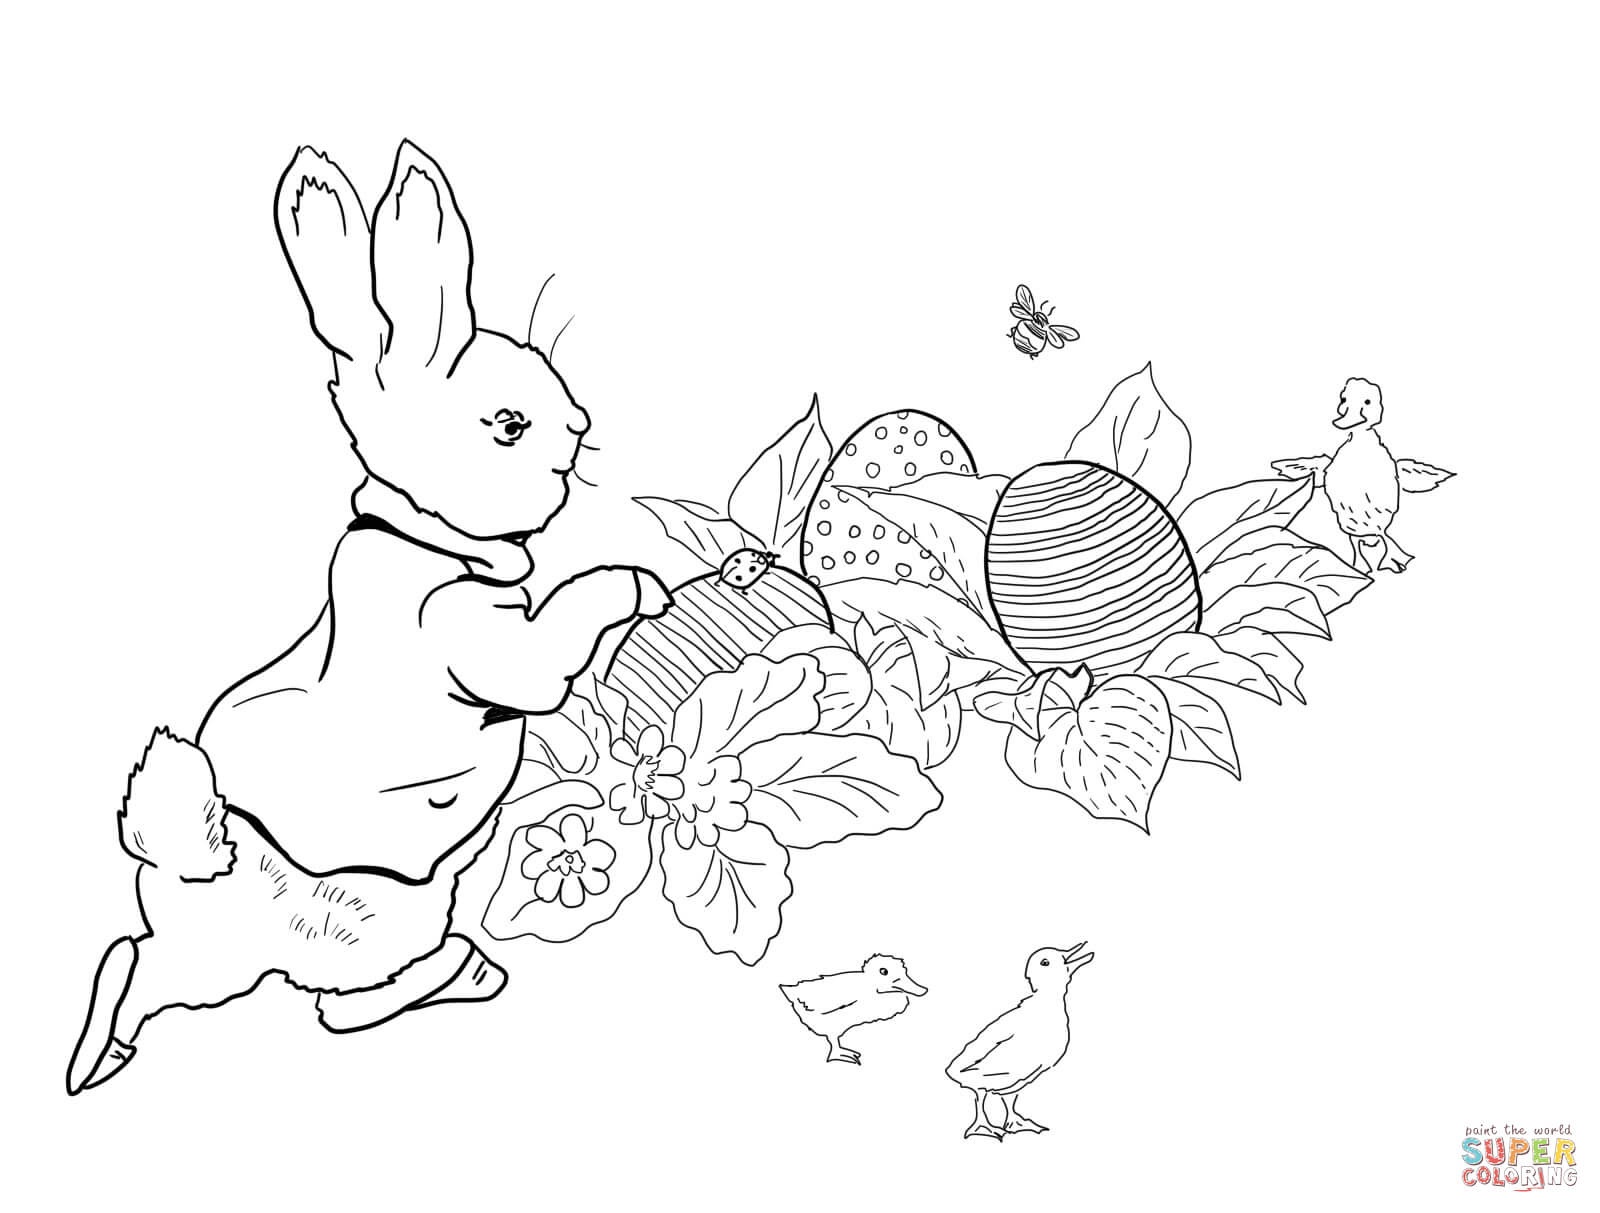 Peter Rabbit Easter Egg Hunt Coloring Page | Free Printable Coloring - Free Printable Peter Rabbit Coloring Pages